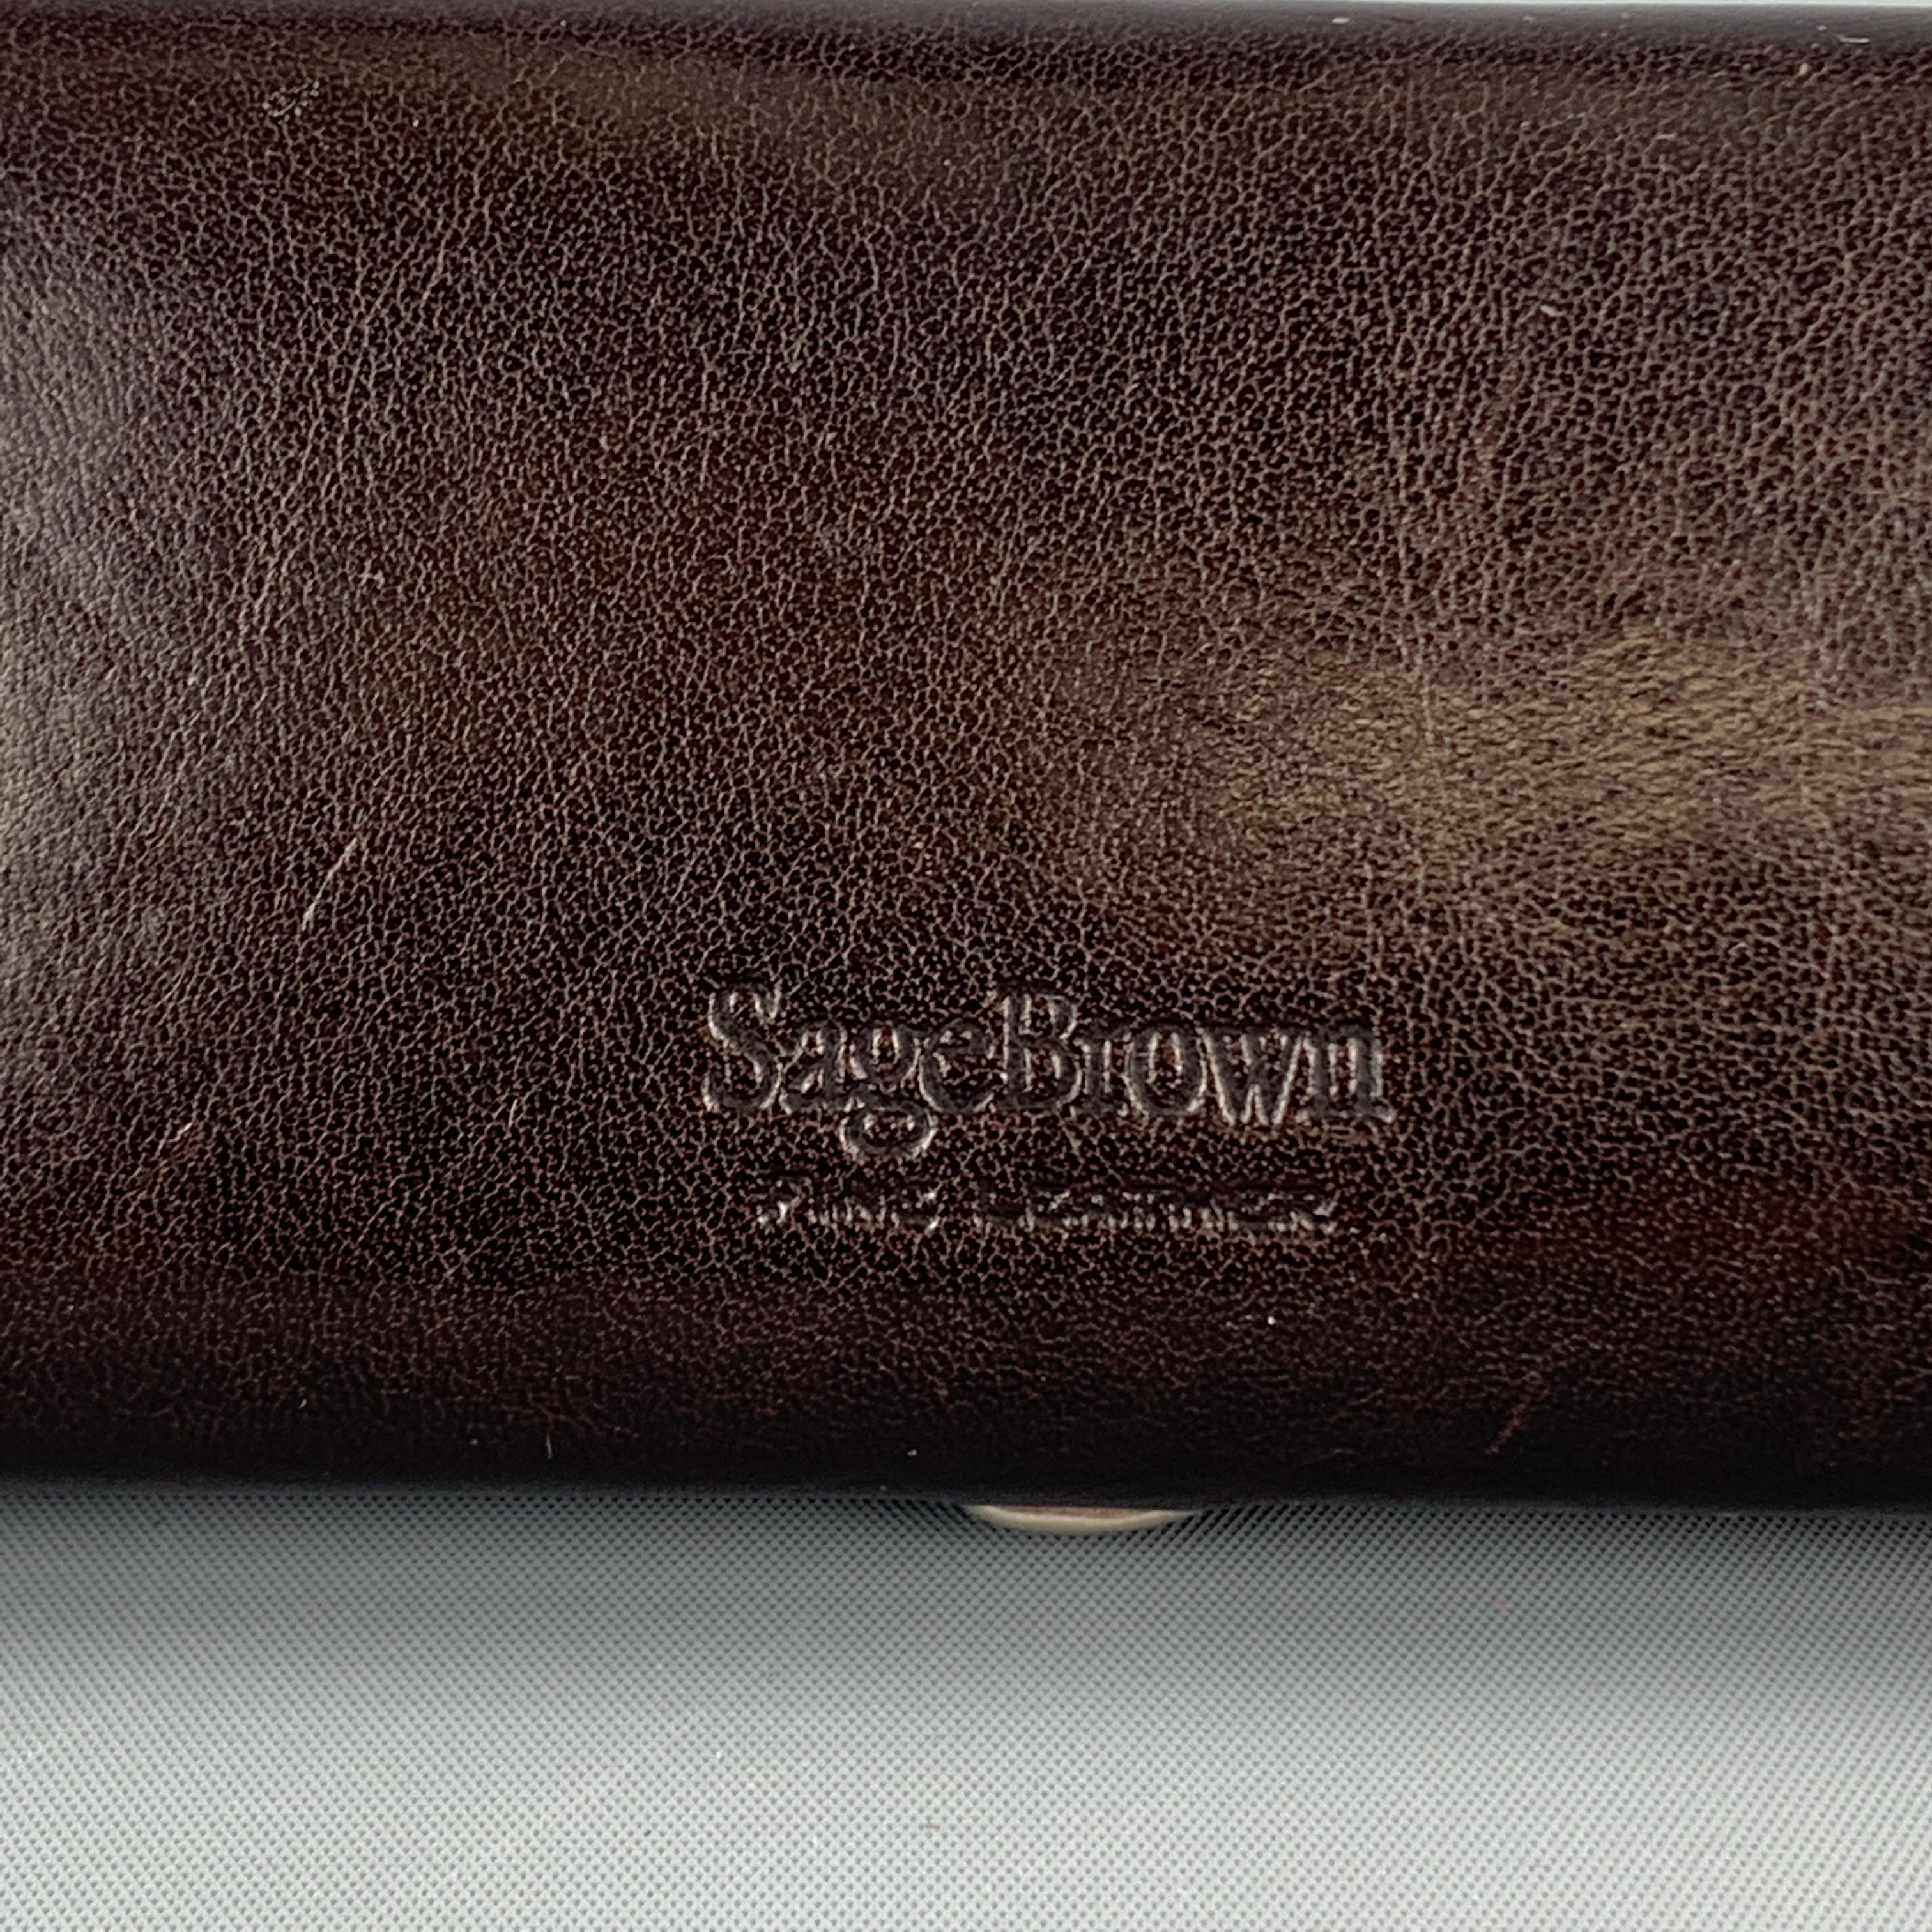 SAGEBROWN sunglasses case comes in deep brown leather with stamped logo, hing closure, and grey interior. 

Good Pre-Owned Condition.

Size: 6.25 x 2.5 in.
Width: 0.75 in.